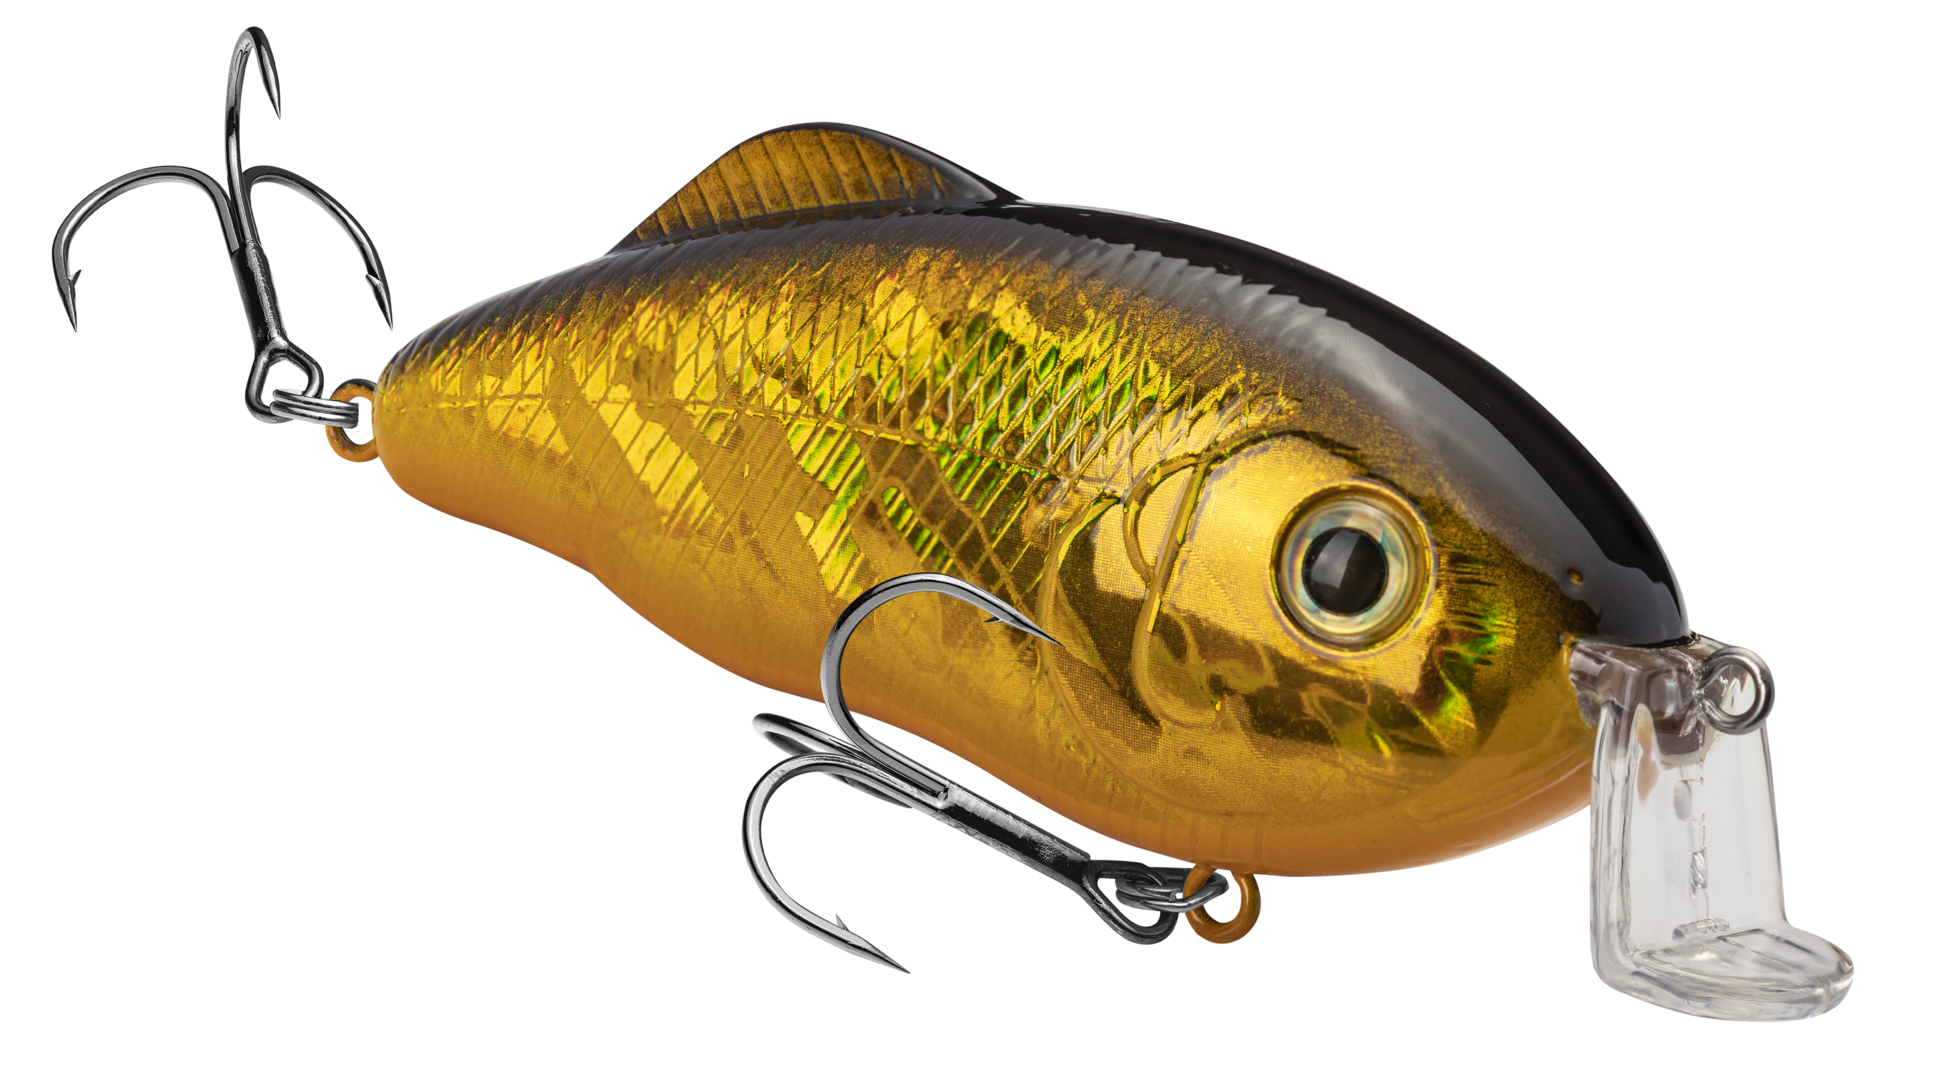 Hutch's Tackle Red Eye Shad Spoon, Size: 435